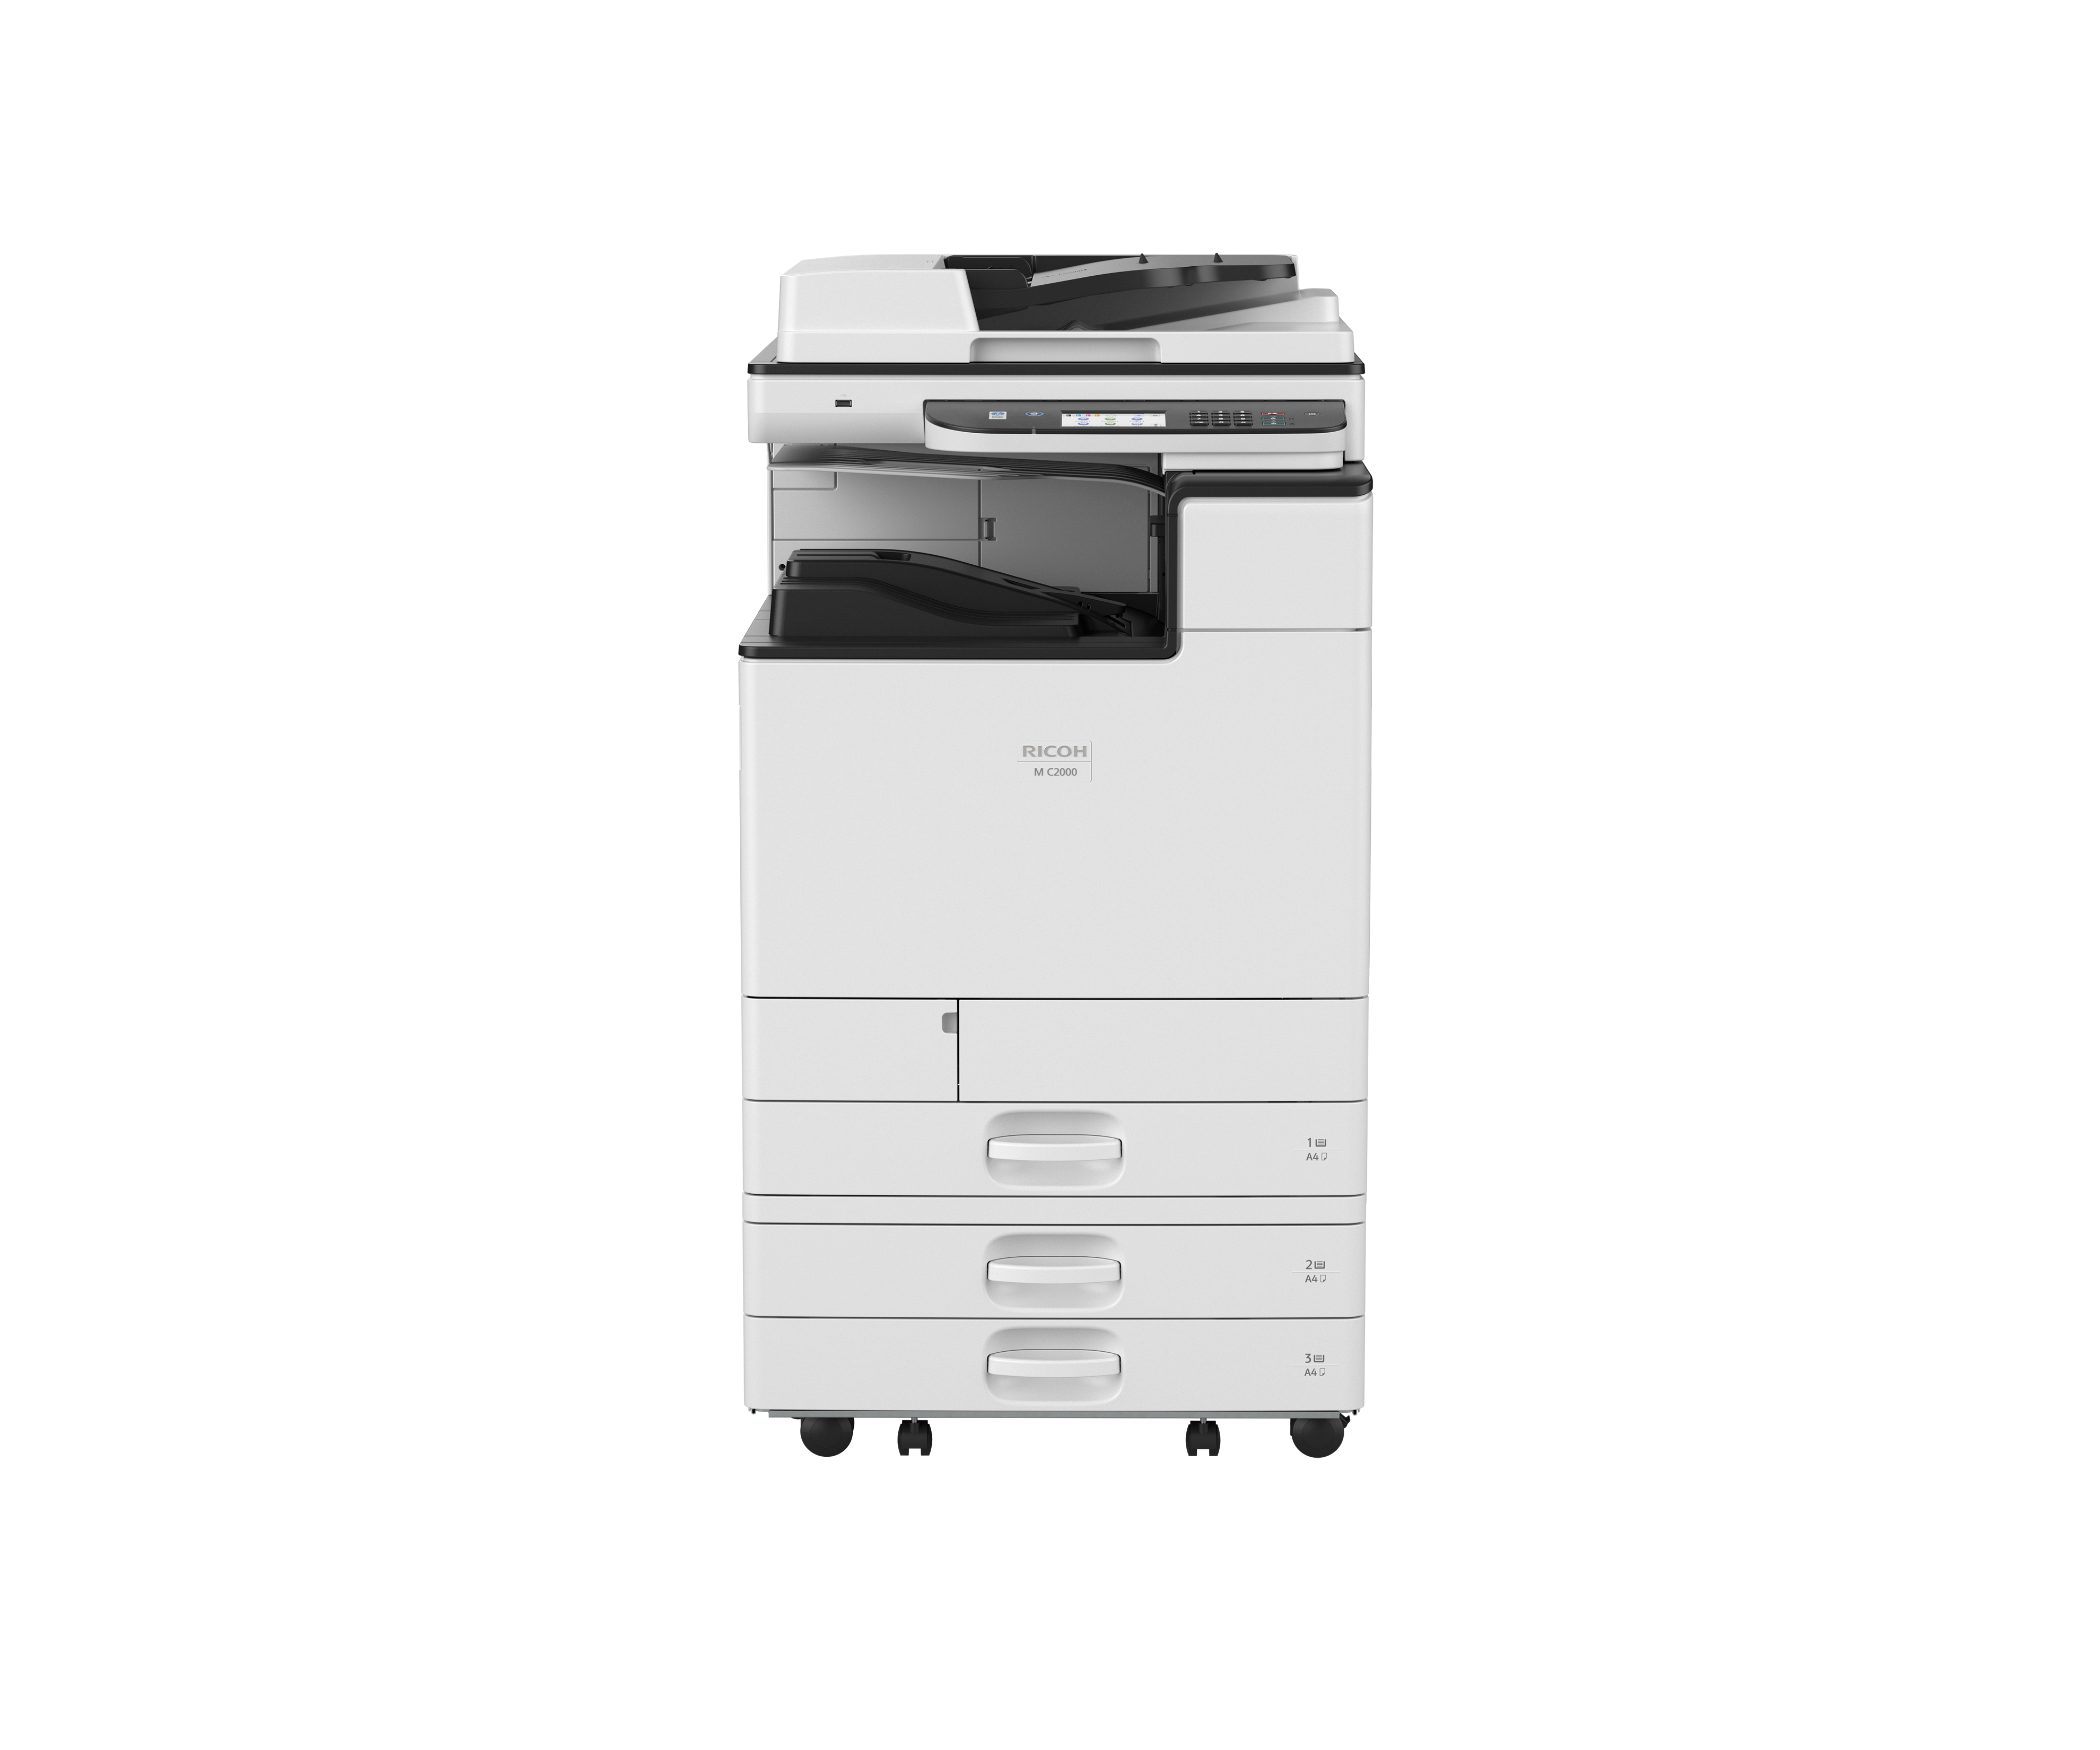 M C2000 - All In One Printer - Front View